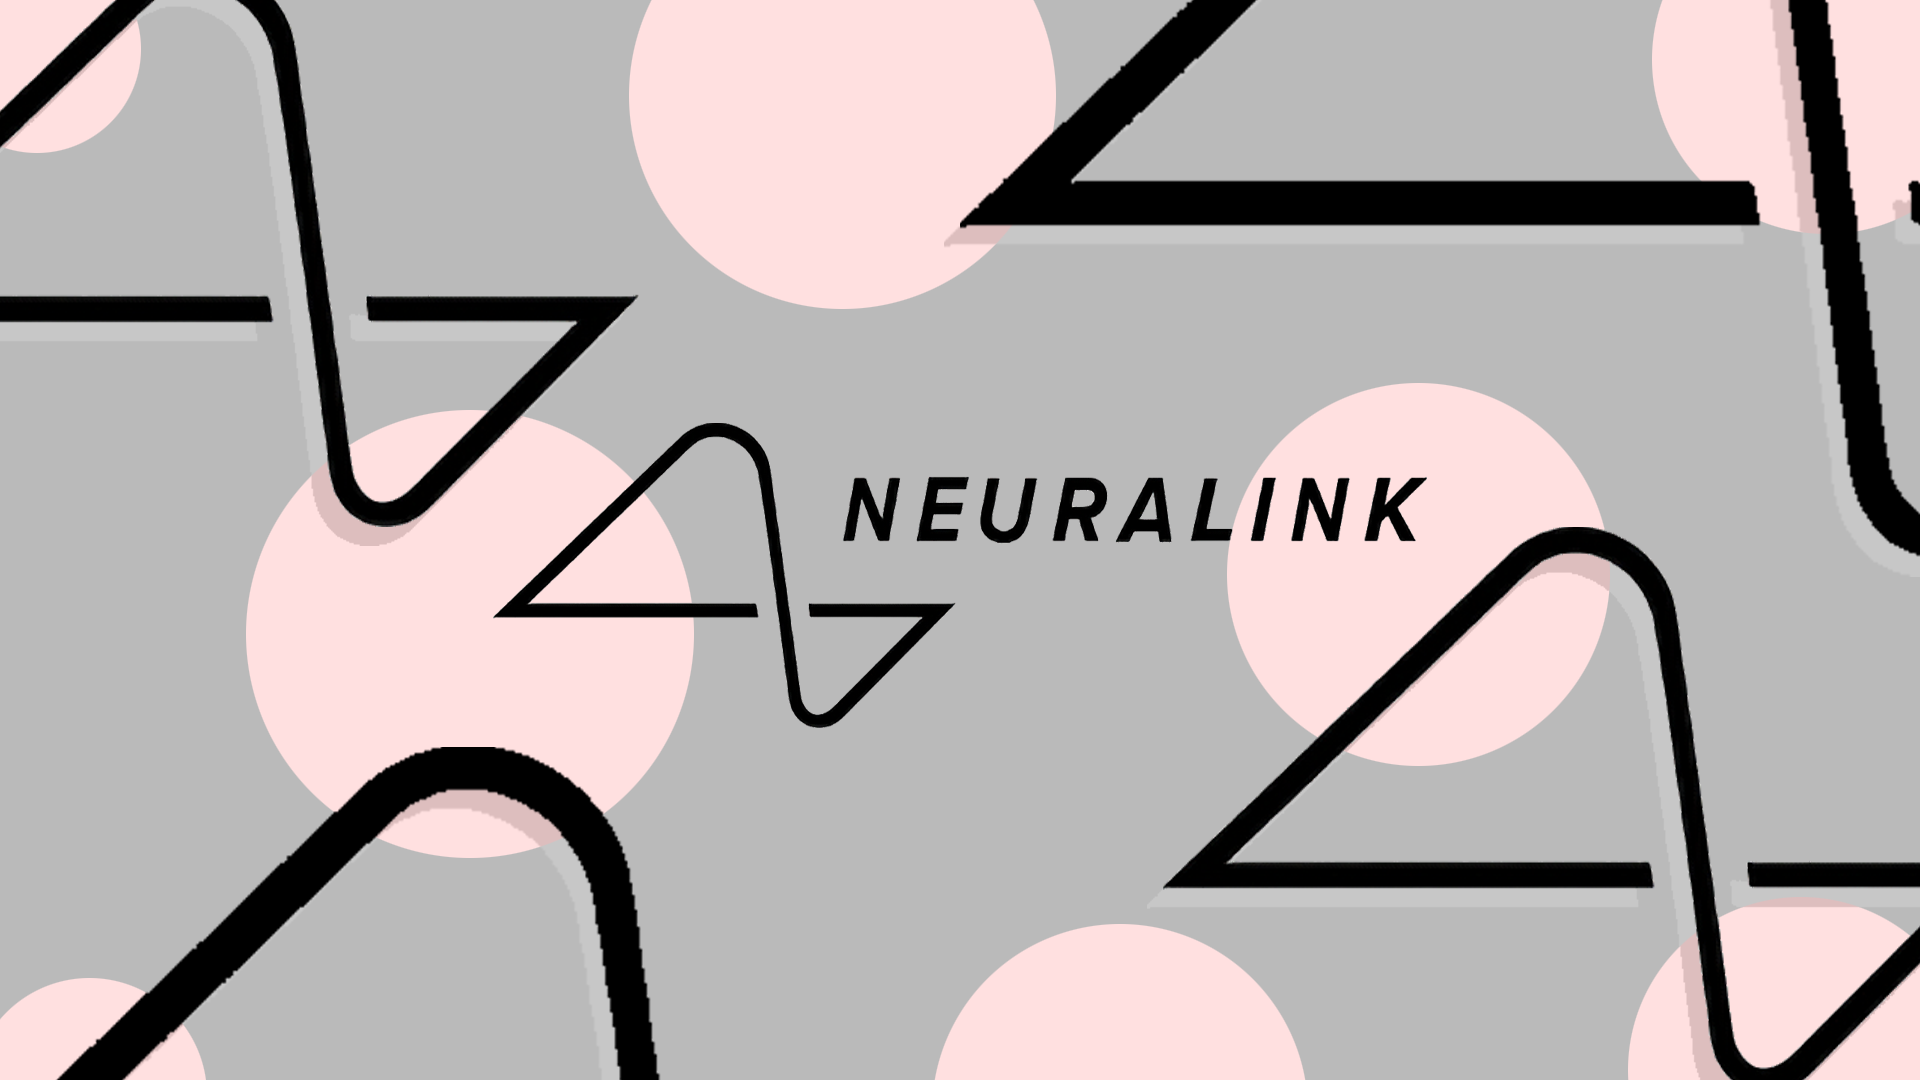 What is going on with Elon Musk’s Neuralink?